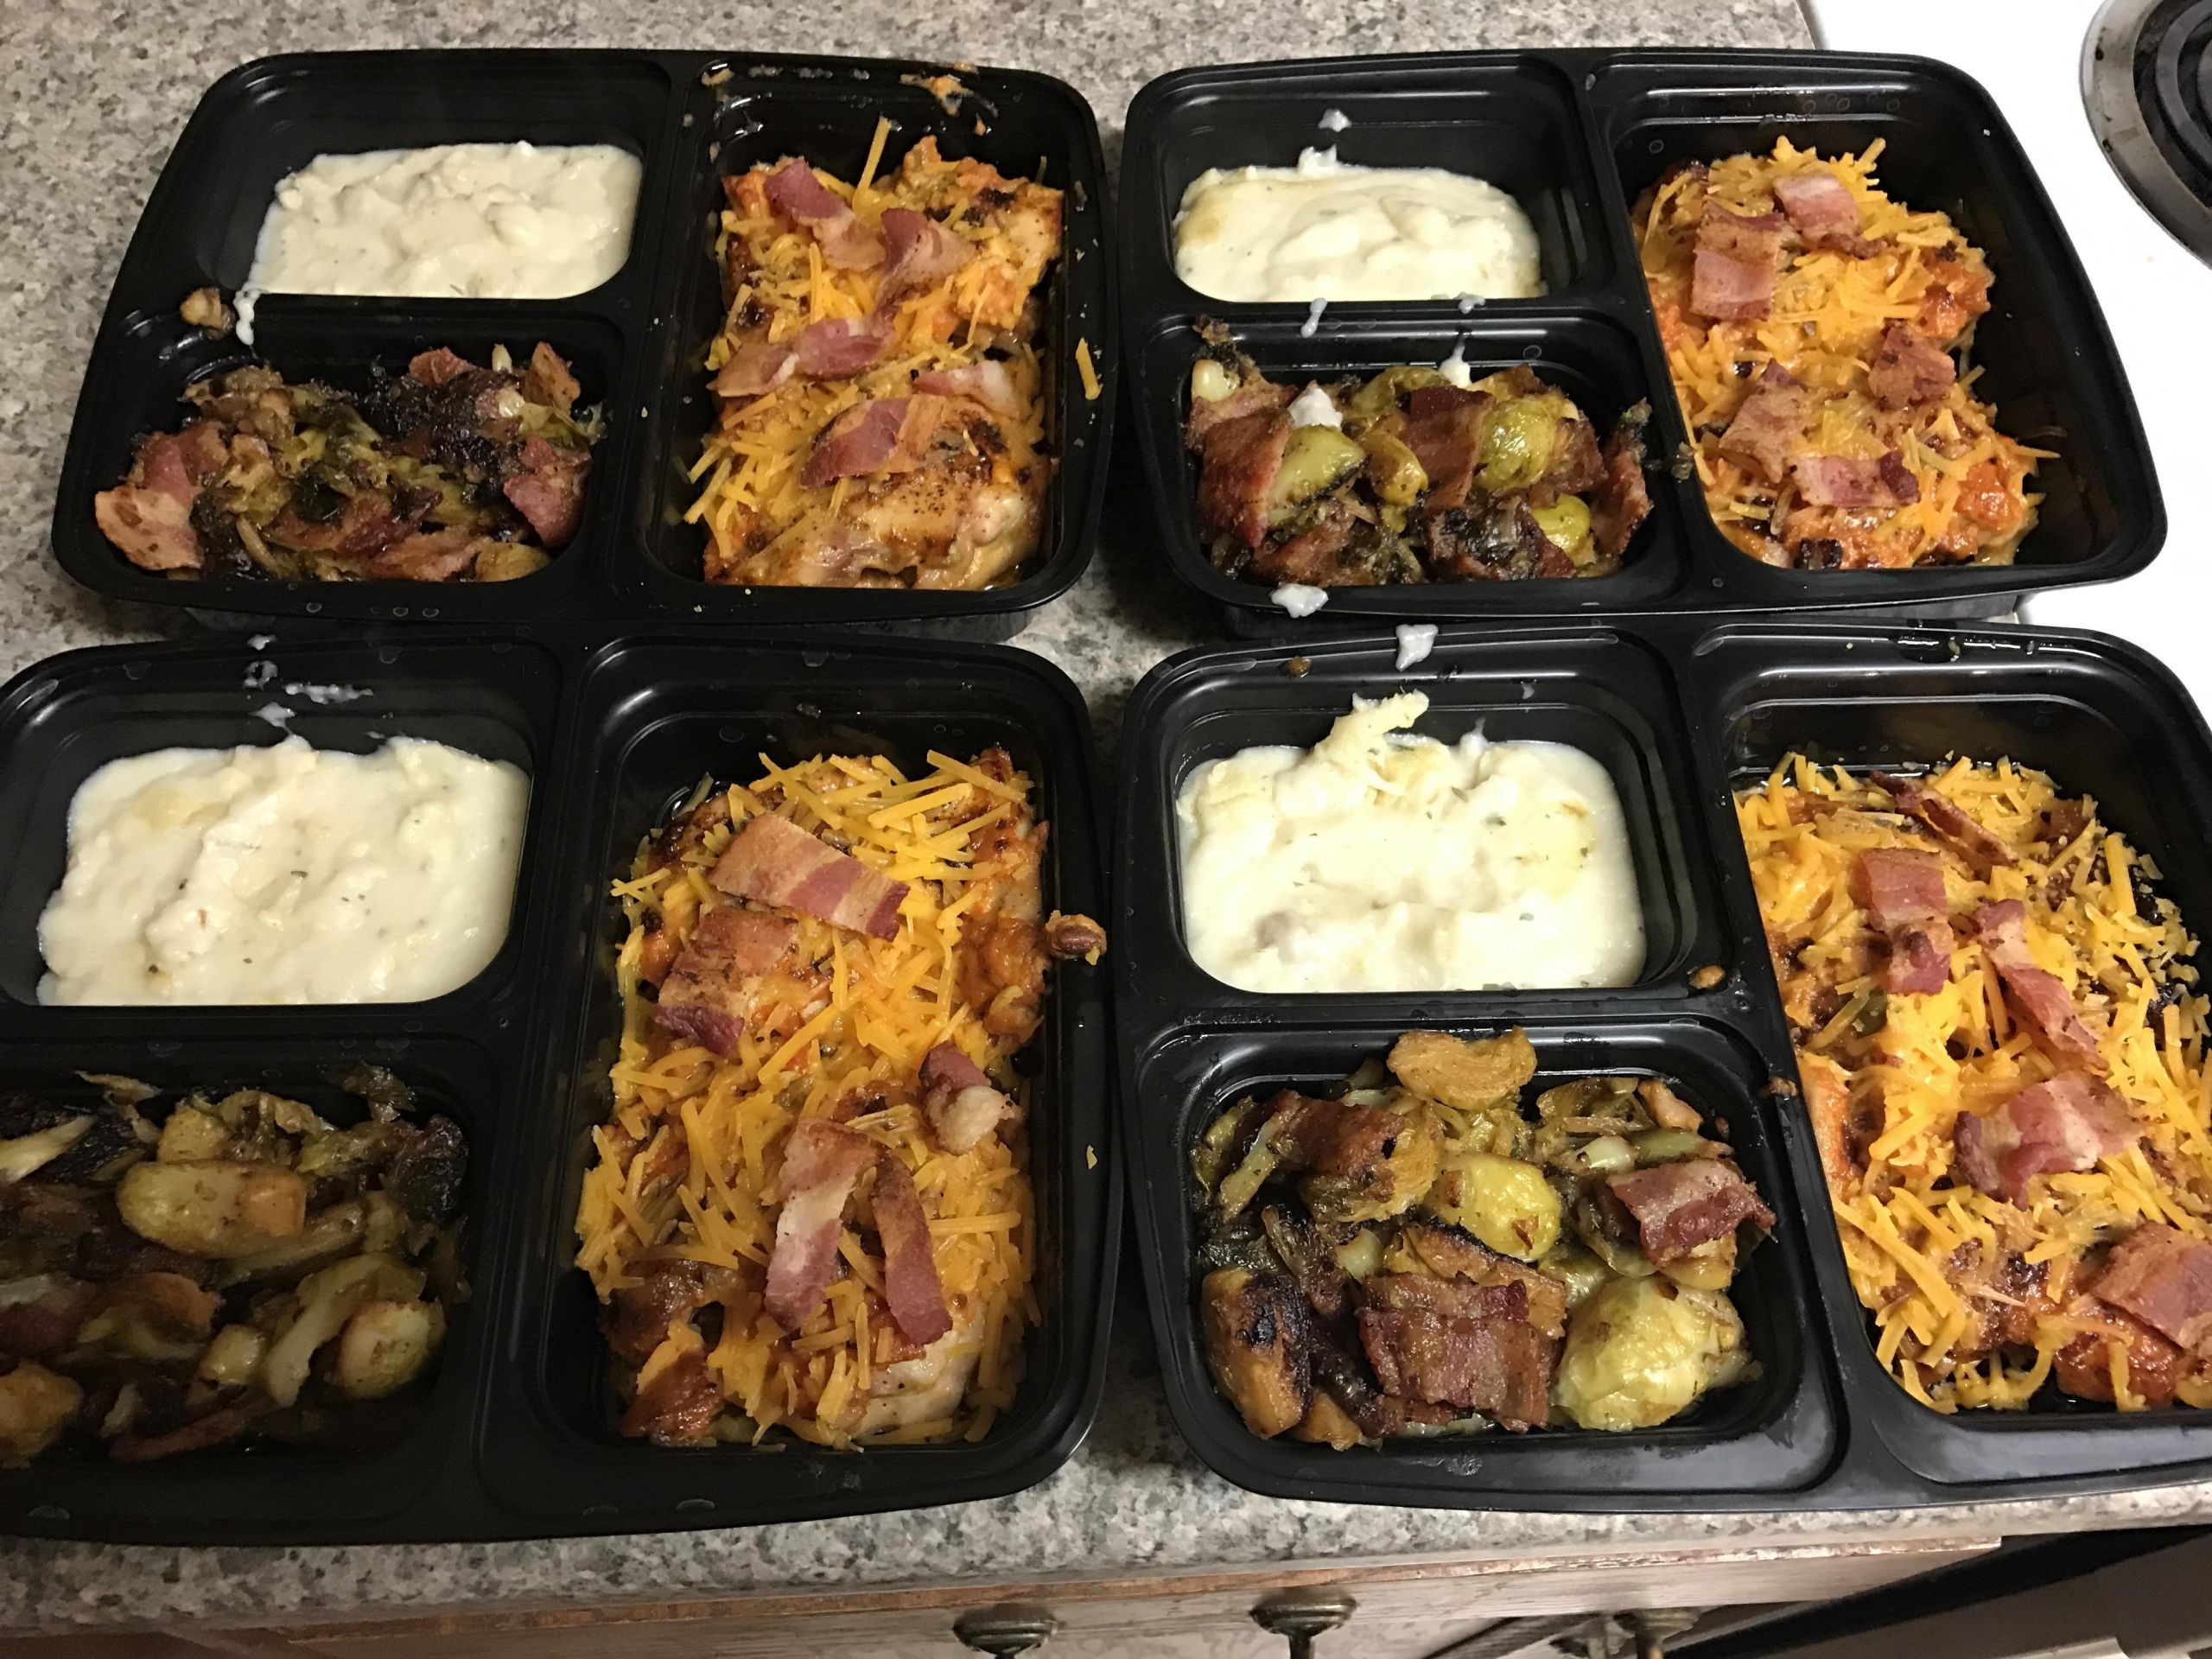 Keto Diet Meal Prep For The Week
 Keto Meal Prep Southwest Chicken Brussel sprouts with